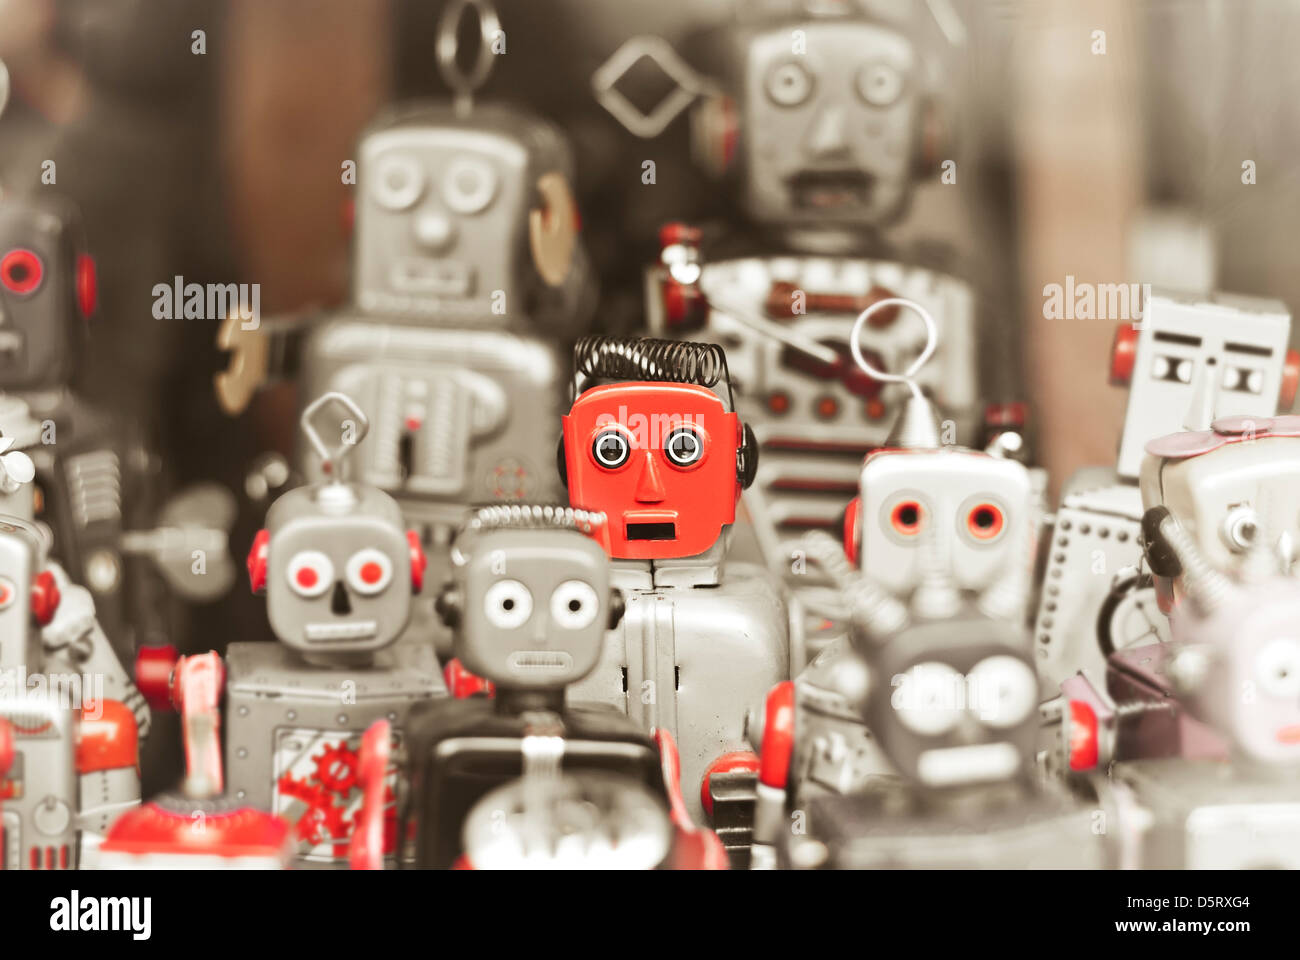 Single robot, standing out among the mass of robots Stock Photo